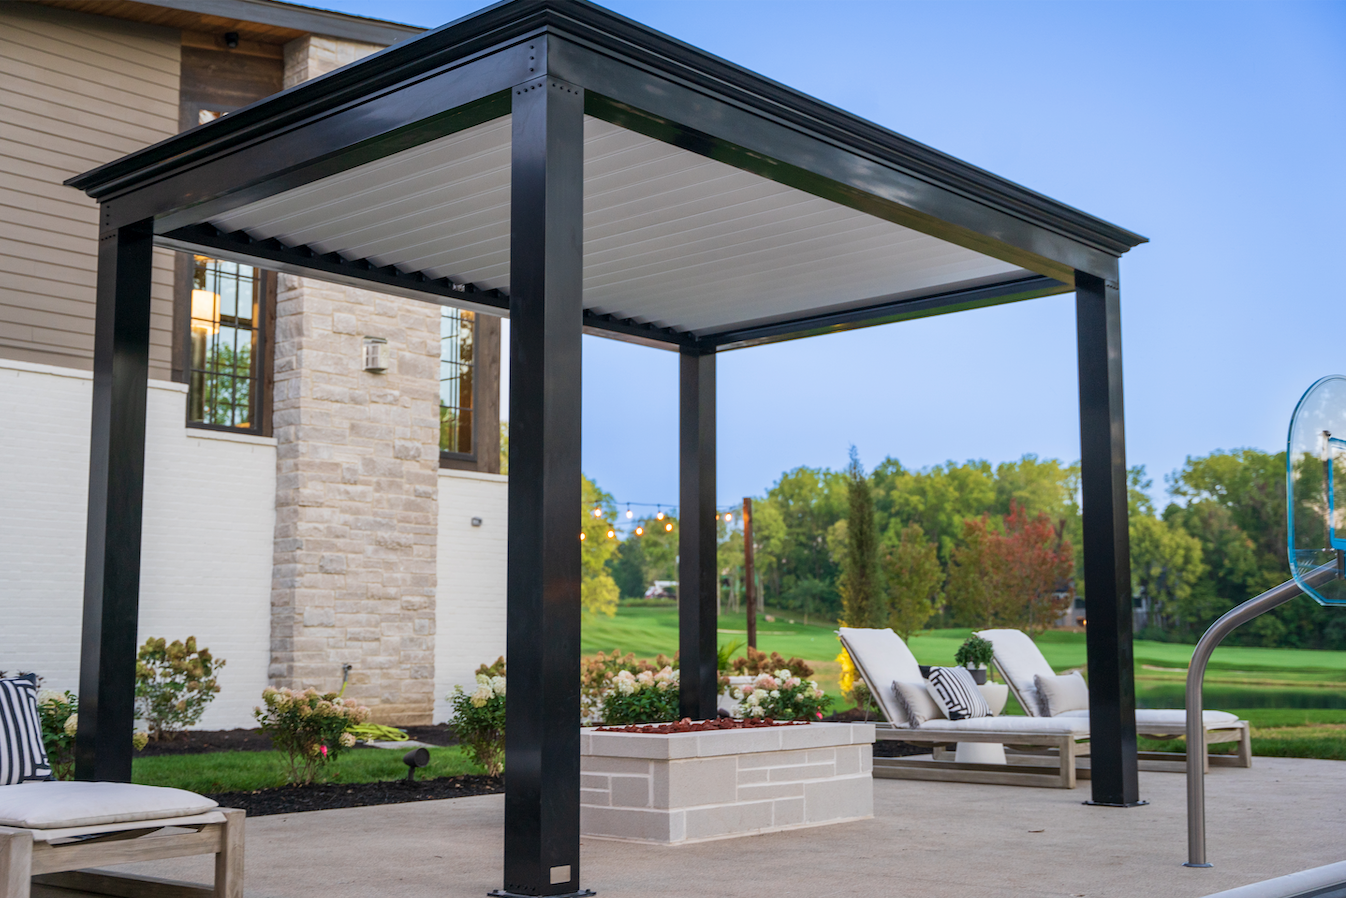 Outdoor Living made better with furniture features next to pergola